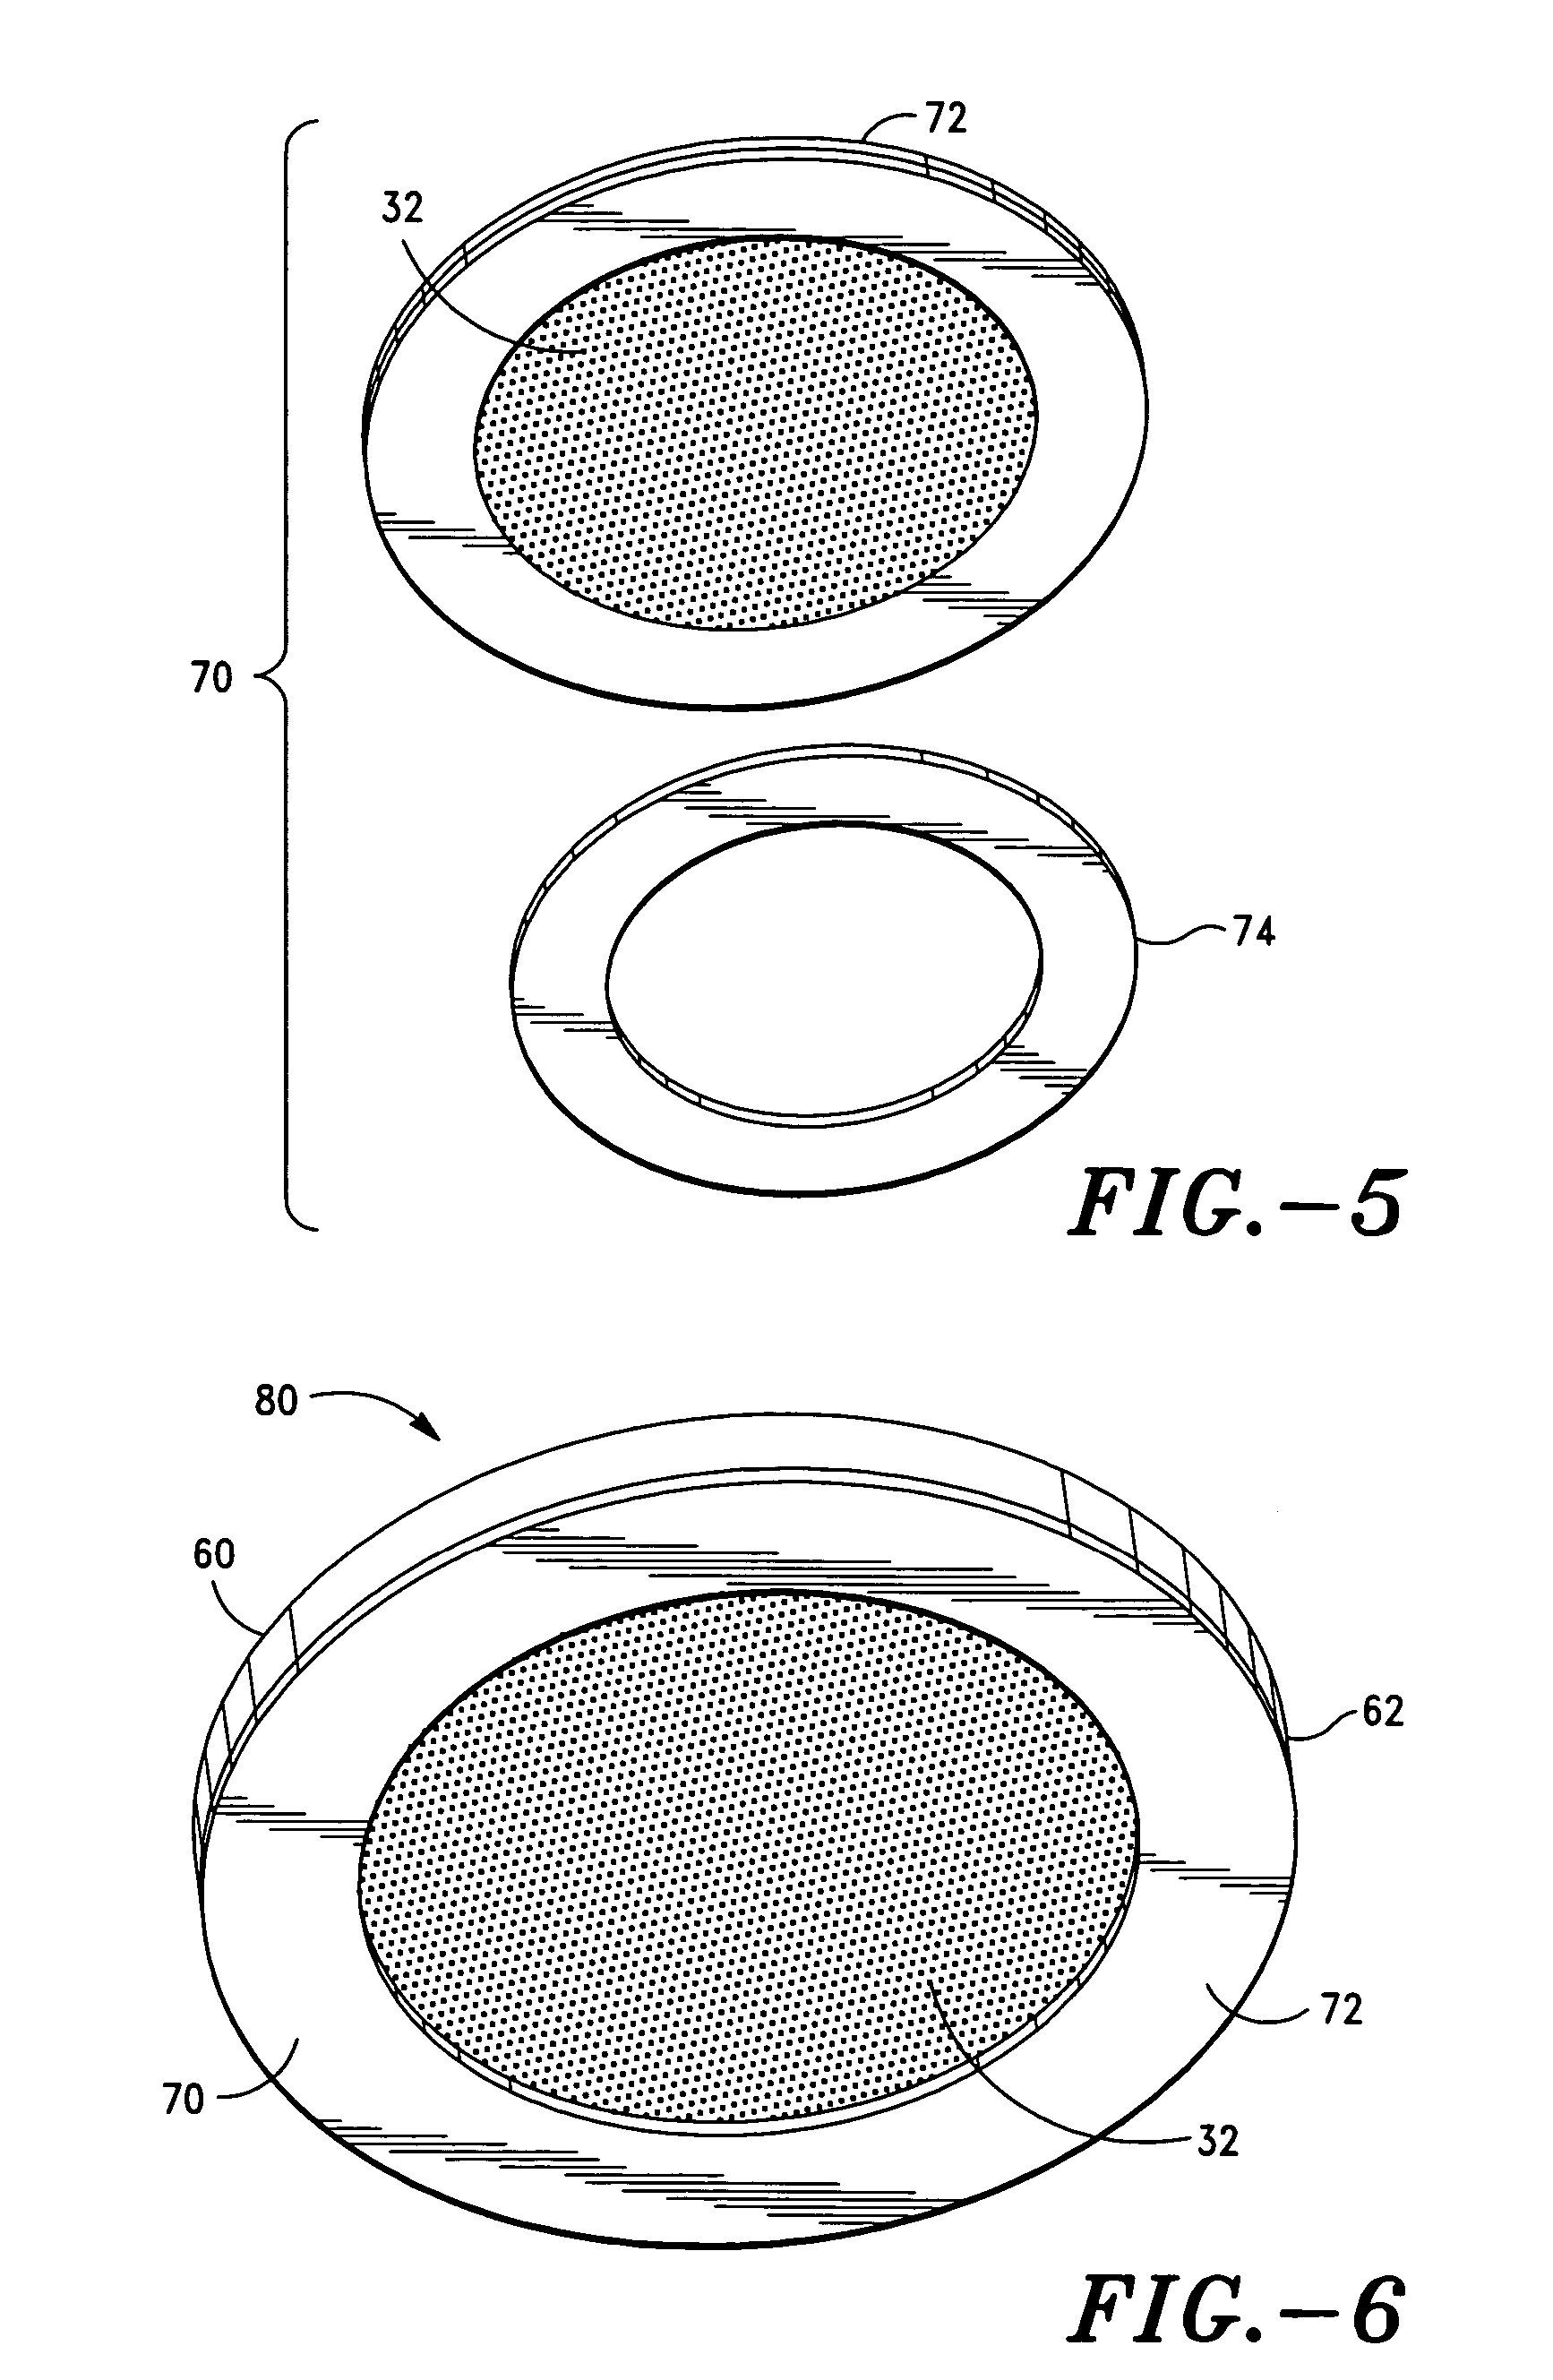 Apparatus and method for transdermal delivery of fentanyl-based agents